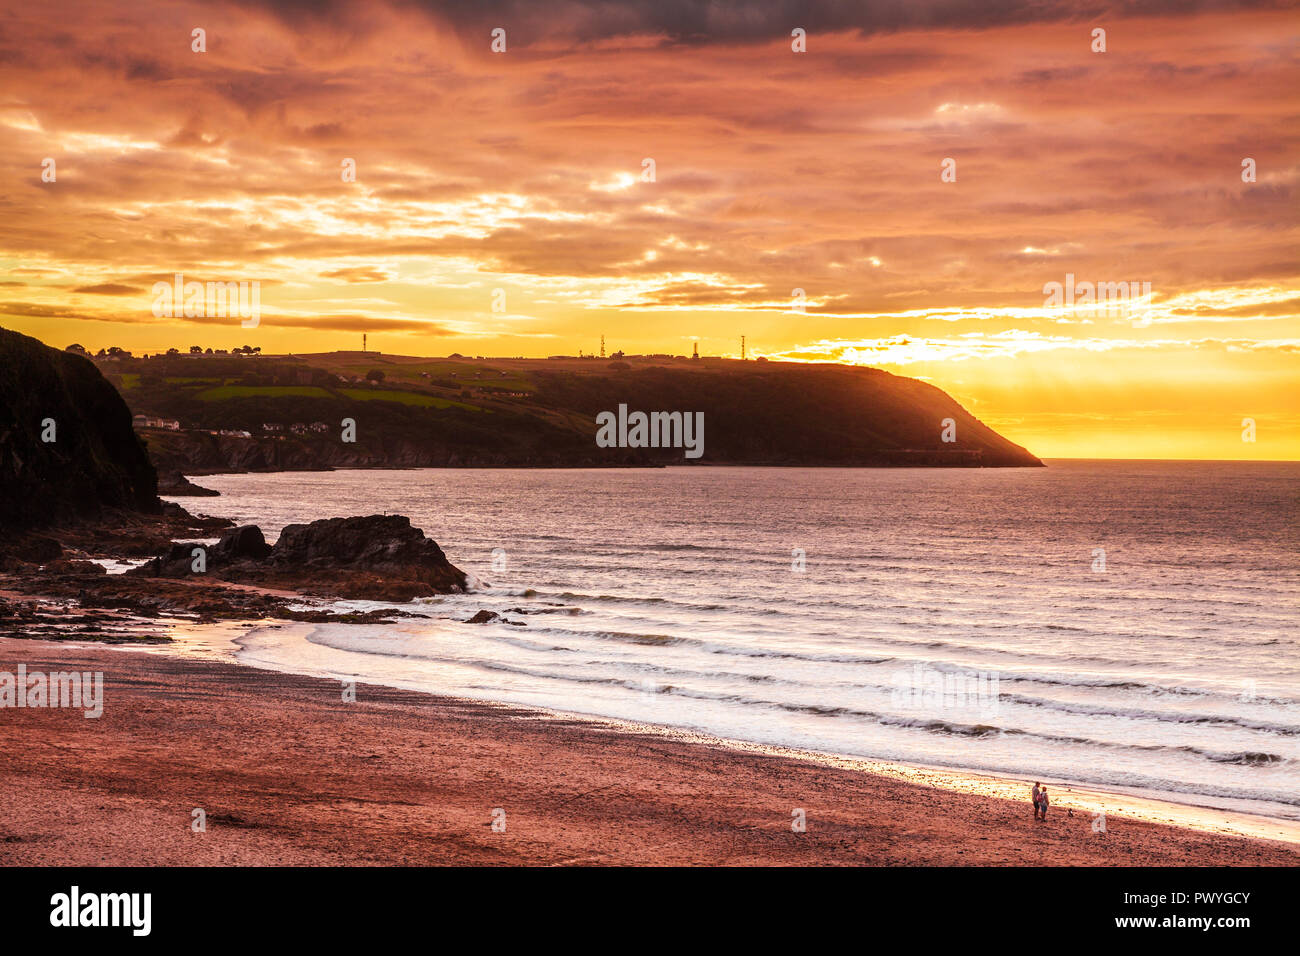 Sunset over the beach at Tresaith in Ceredigion, Wales, looking towards Aberporth. Stock Photo